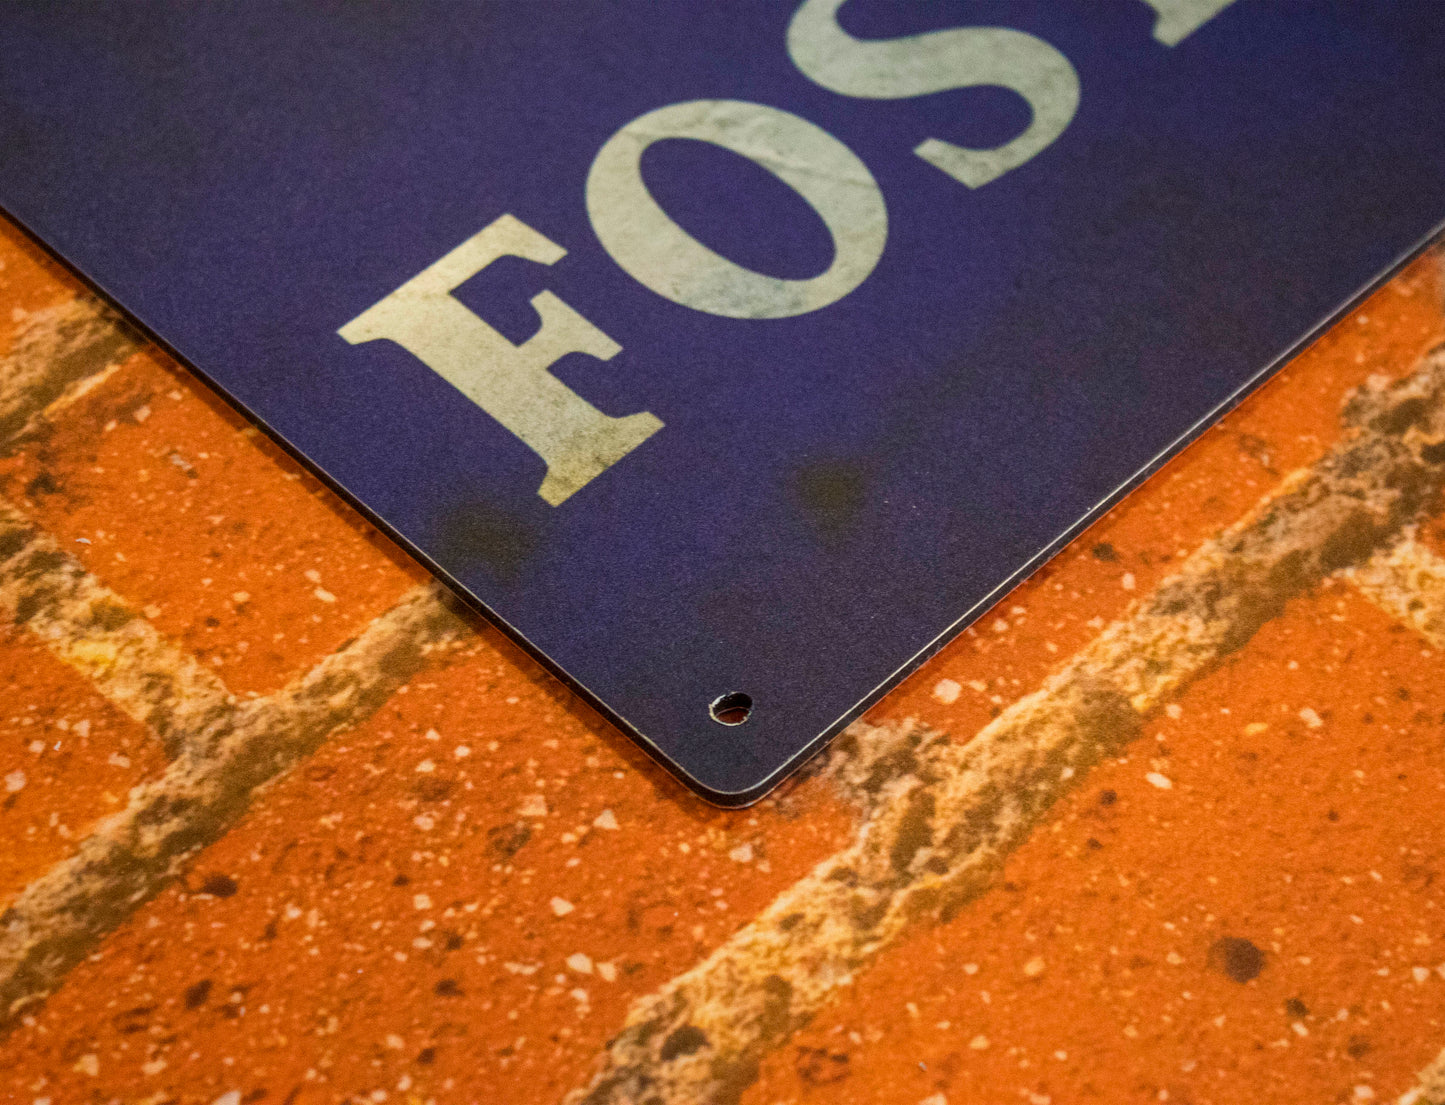 Fosters Metal Sign